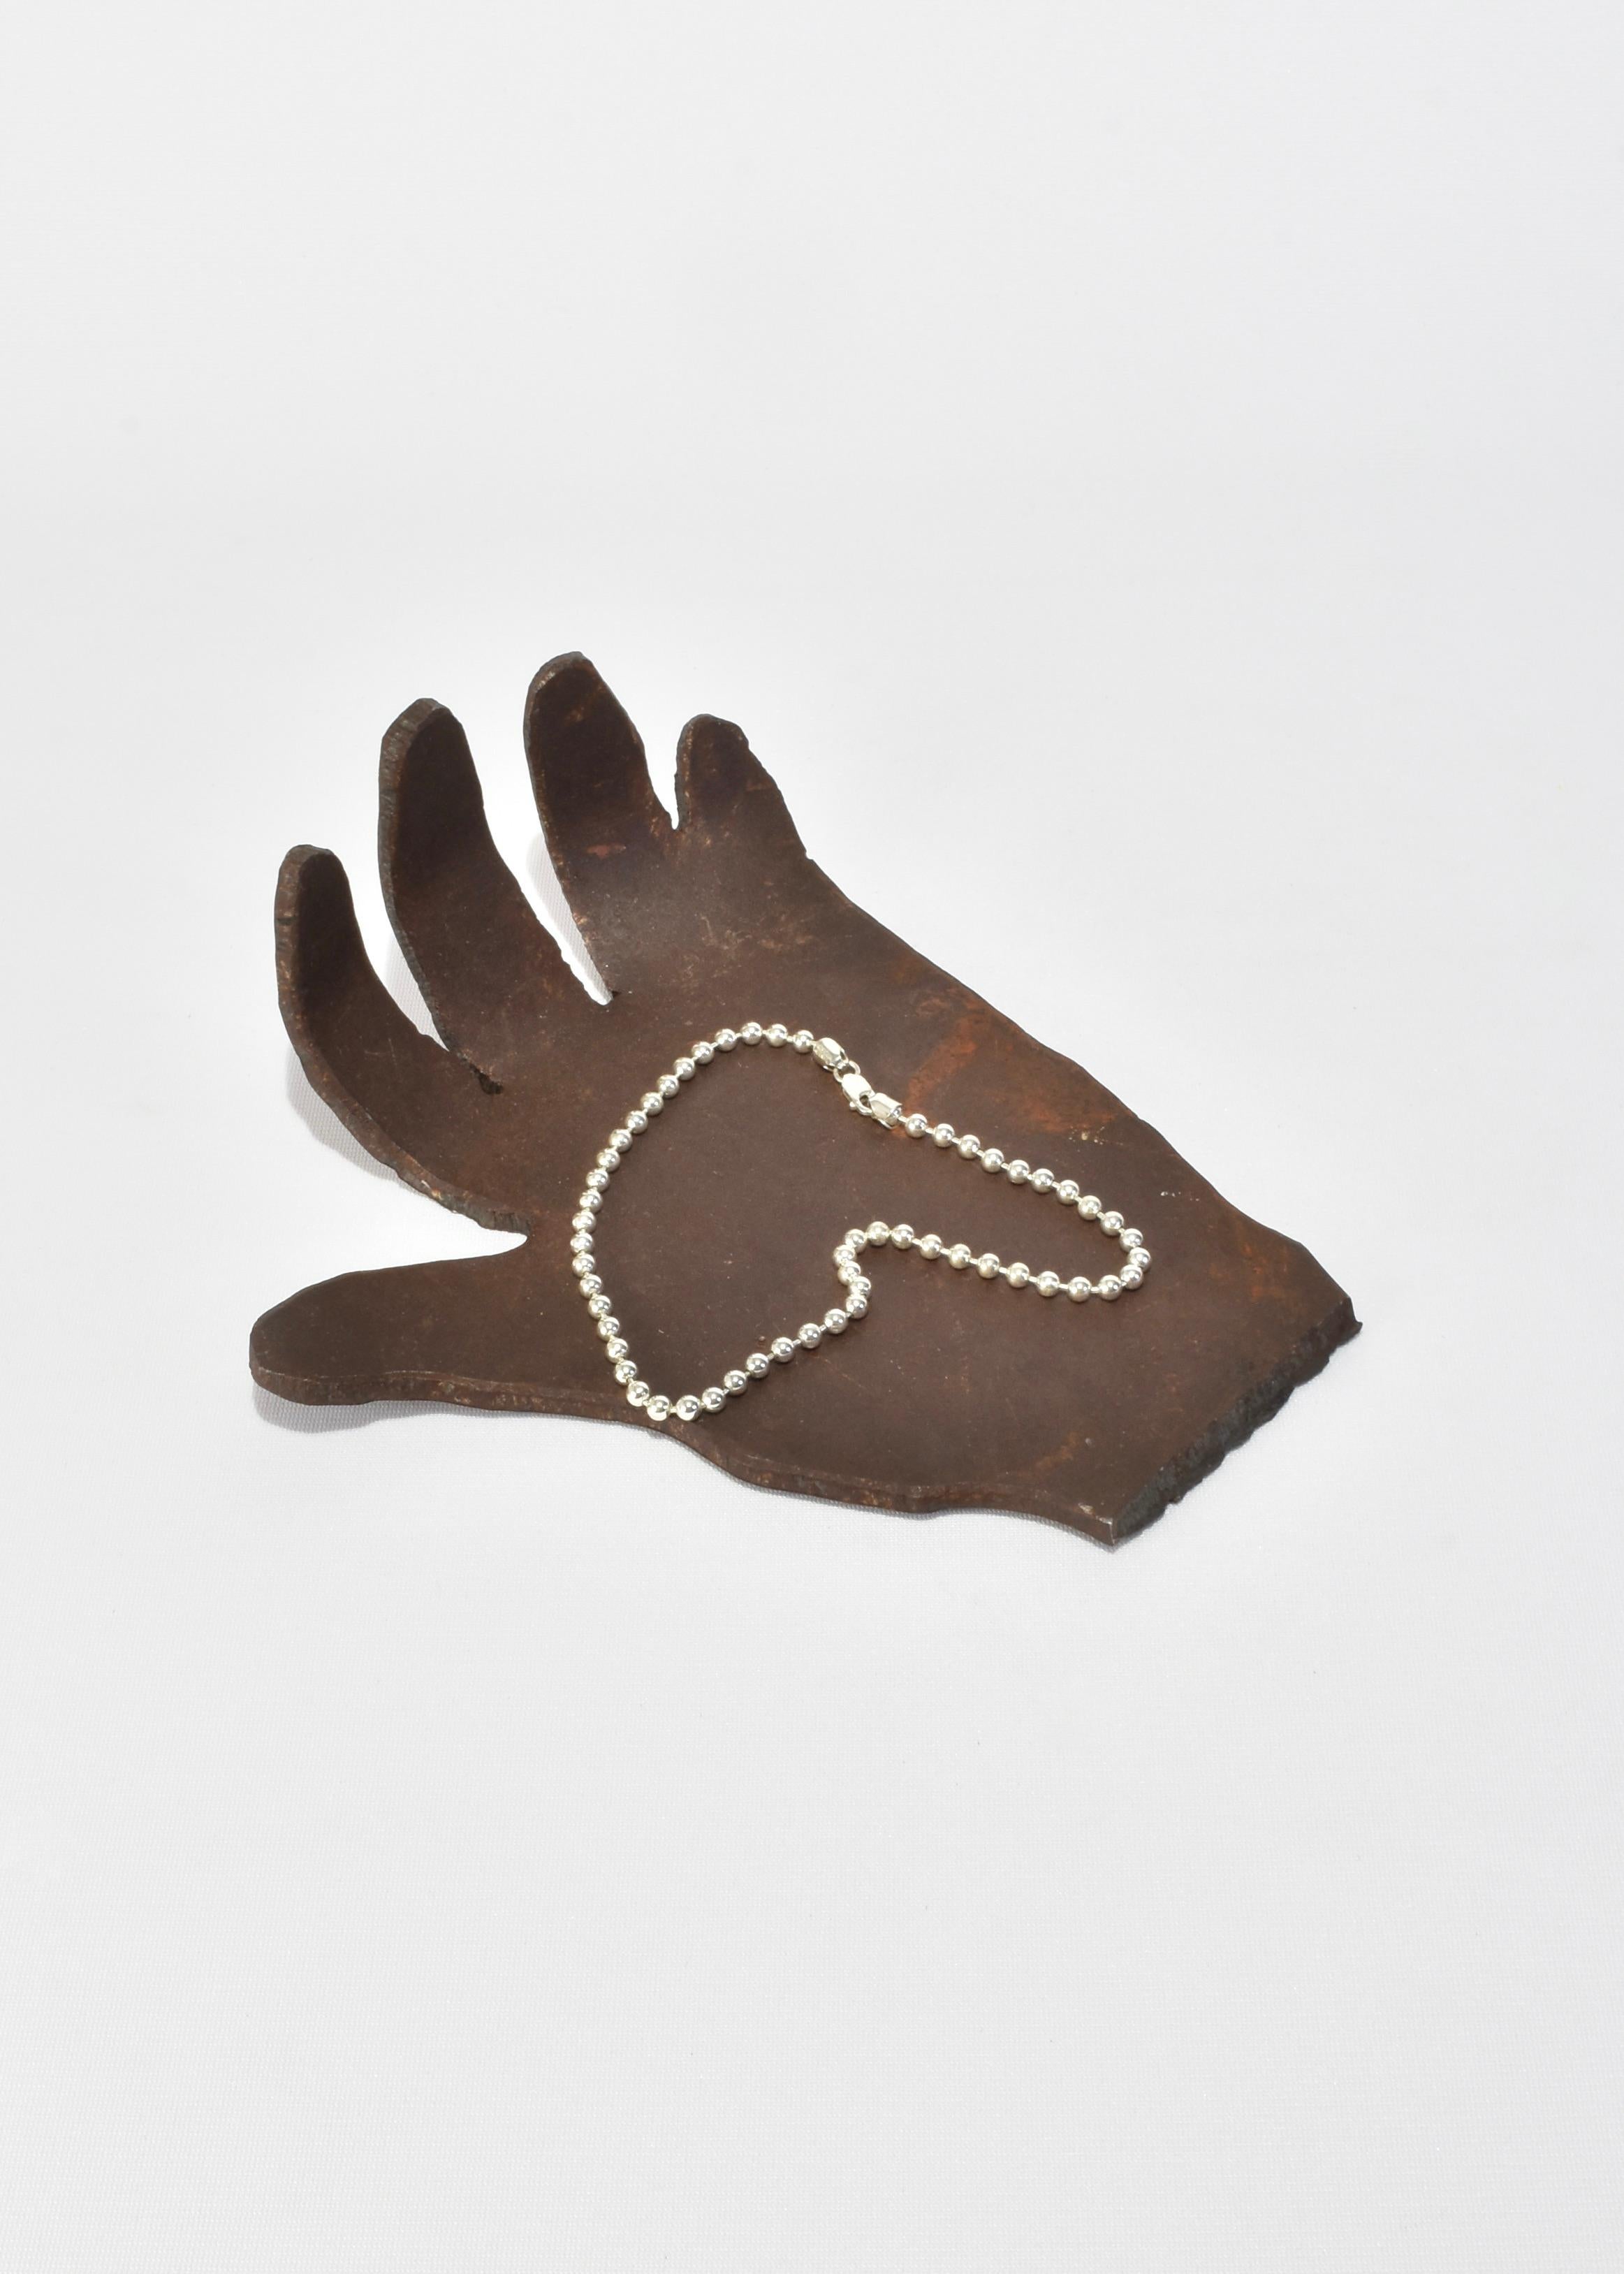 20th Century Hand Sculpture For Sale